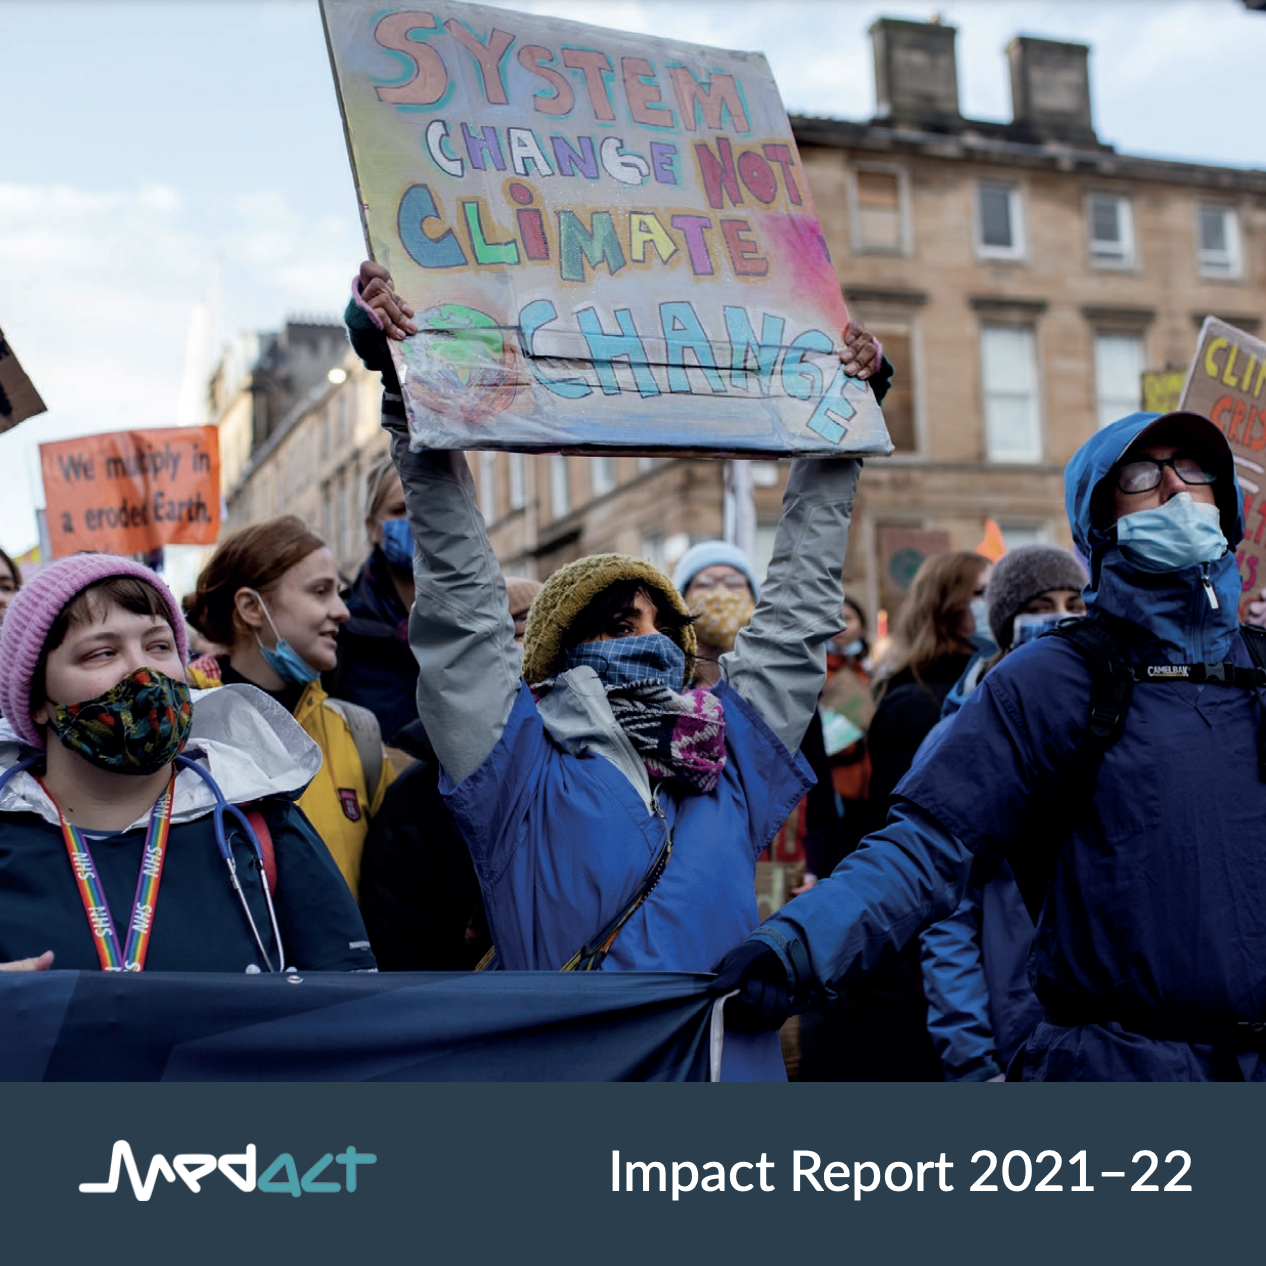 Medact Impact Report 2021-22 cover: Cover image features health workers in scrubs, facemasks, marching with placards. One placard reads in colourful letters: 'System Change Not Climate Change'.